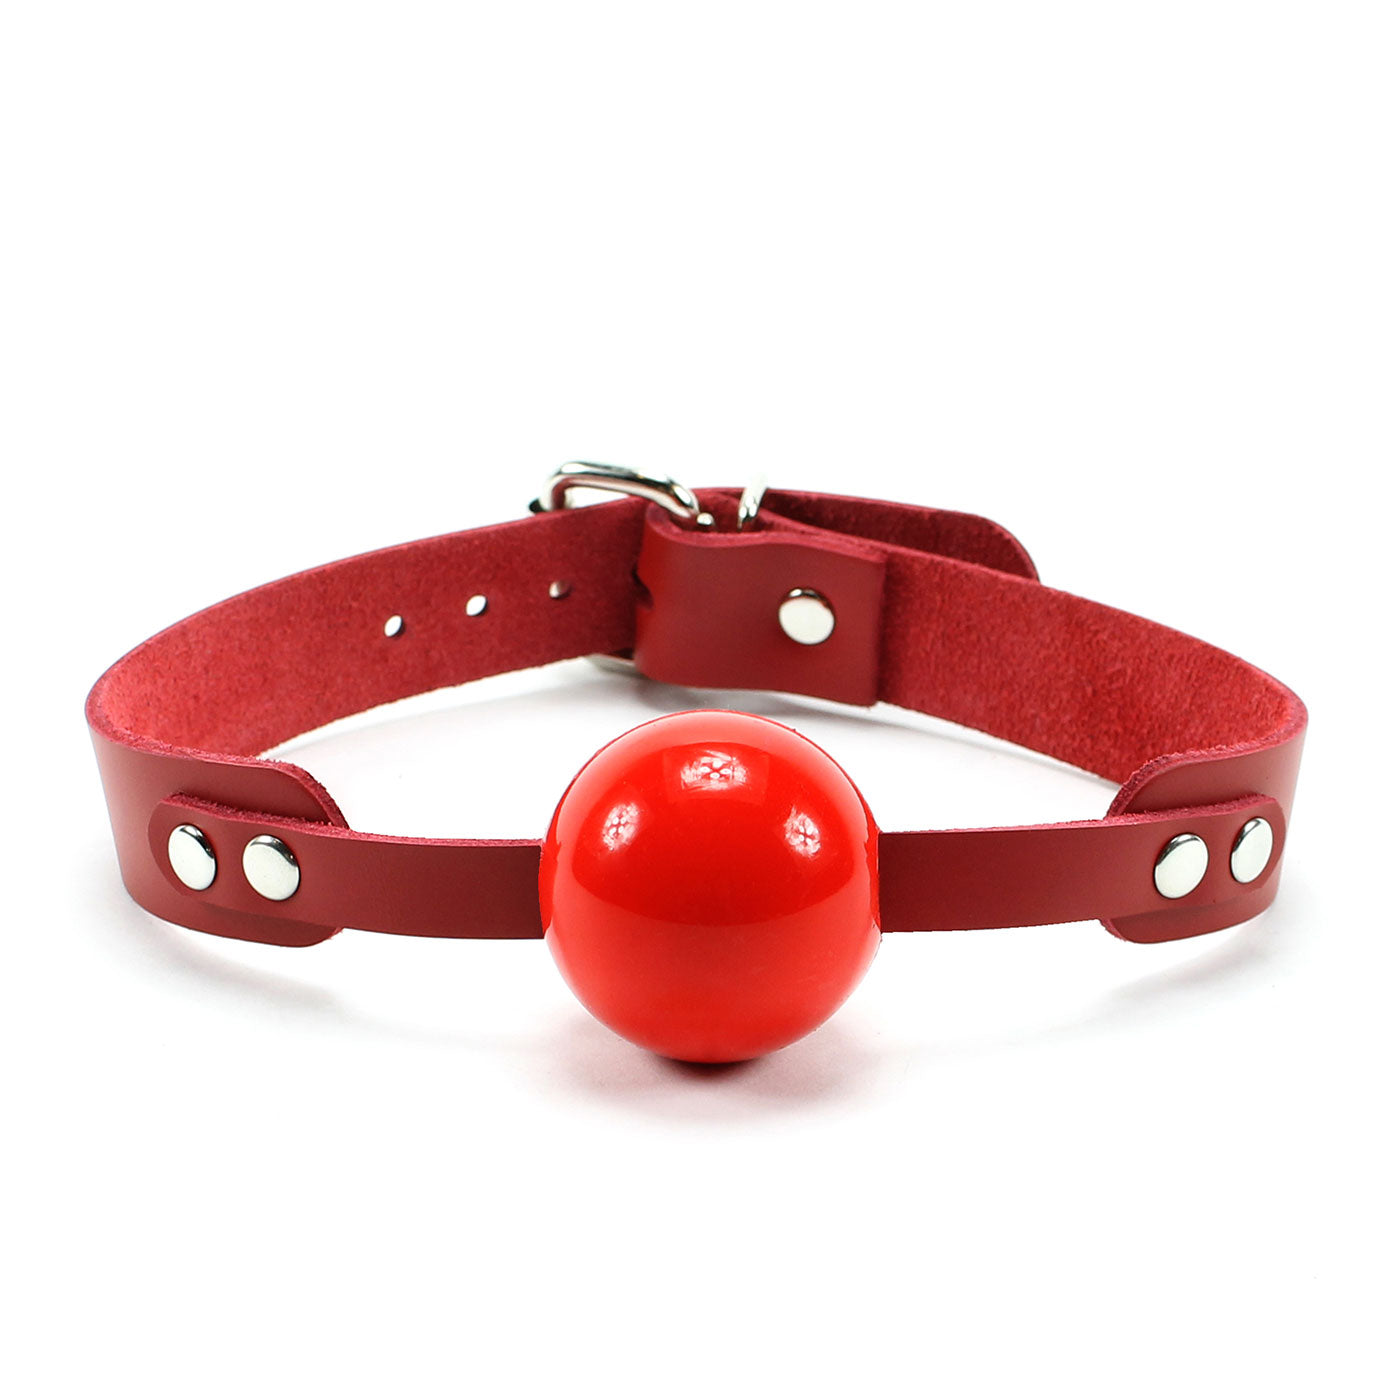 Kathleen Luxury BDSM Ball Gag Red Leather Red Ball